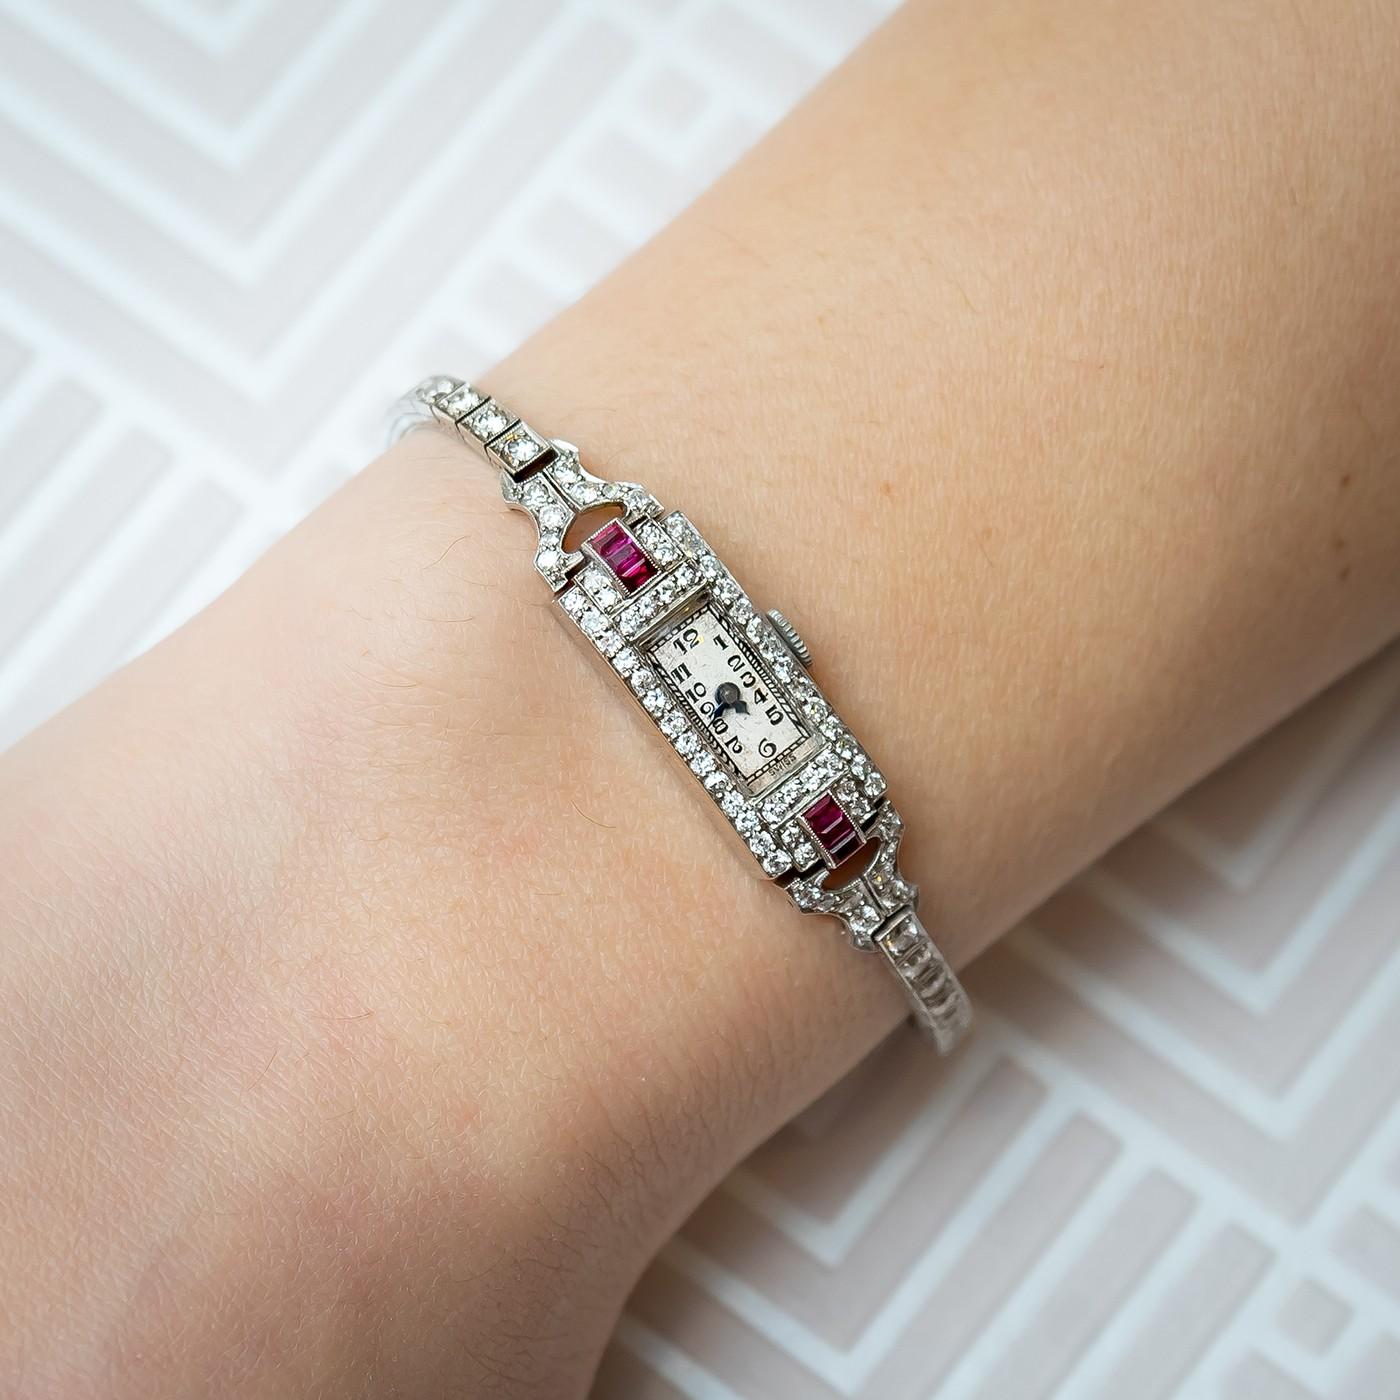 Ruby and diamond cocktail wristwatch, rectangular dial with dial with Arabic numerals, surrounded by round brilliant-cut diamonds with three baguette cut rubies to the lugs, platinum case, on a platinum diamond set bracelet, 17 jewel Accurist manual